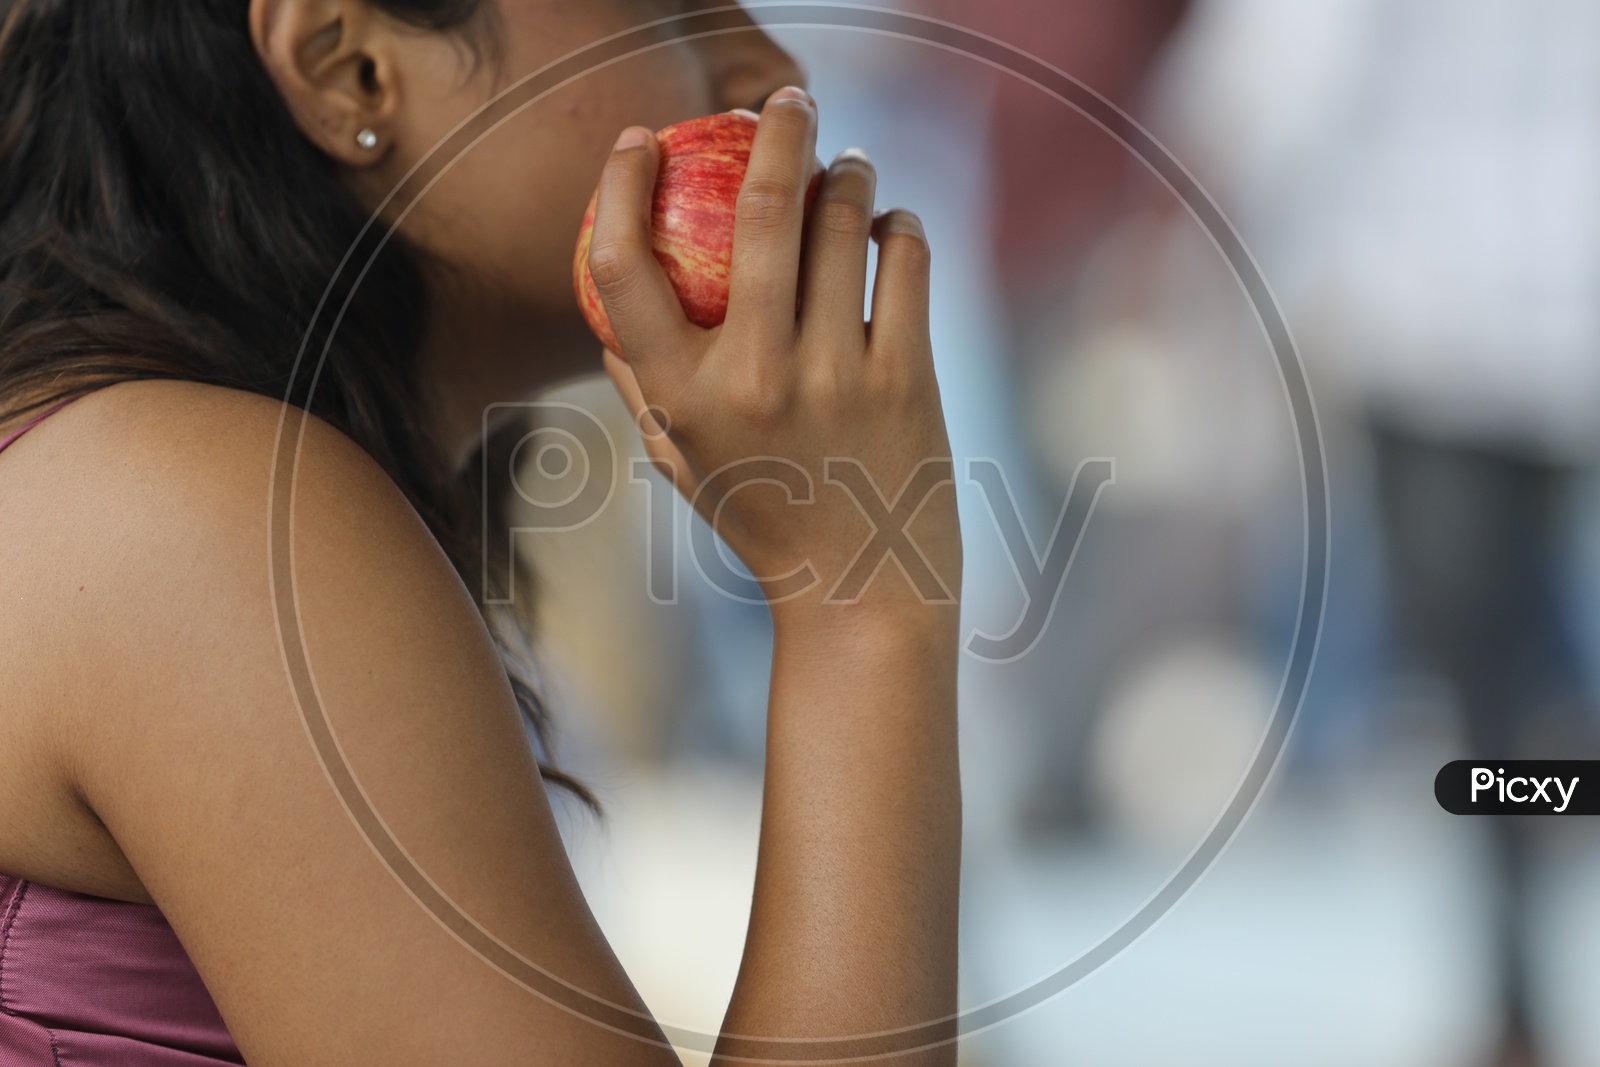 Indian Woman holding an Apple